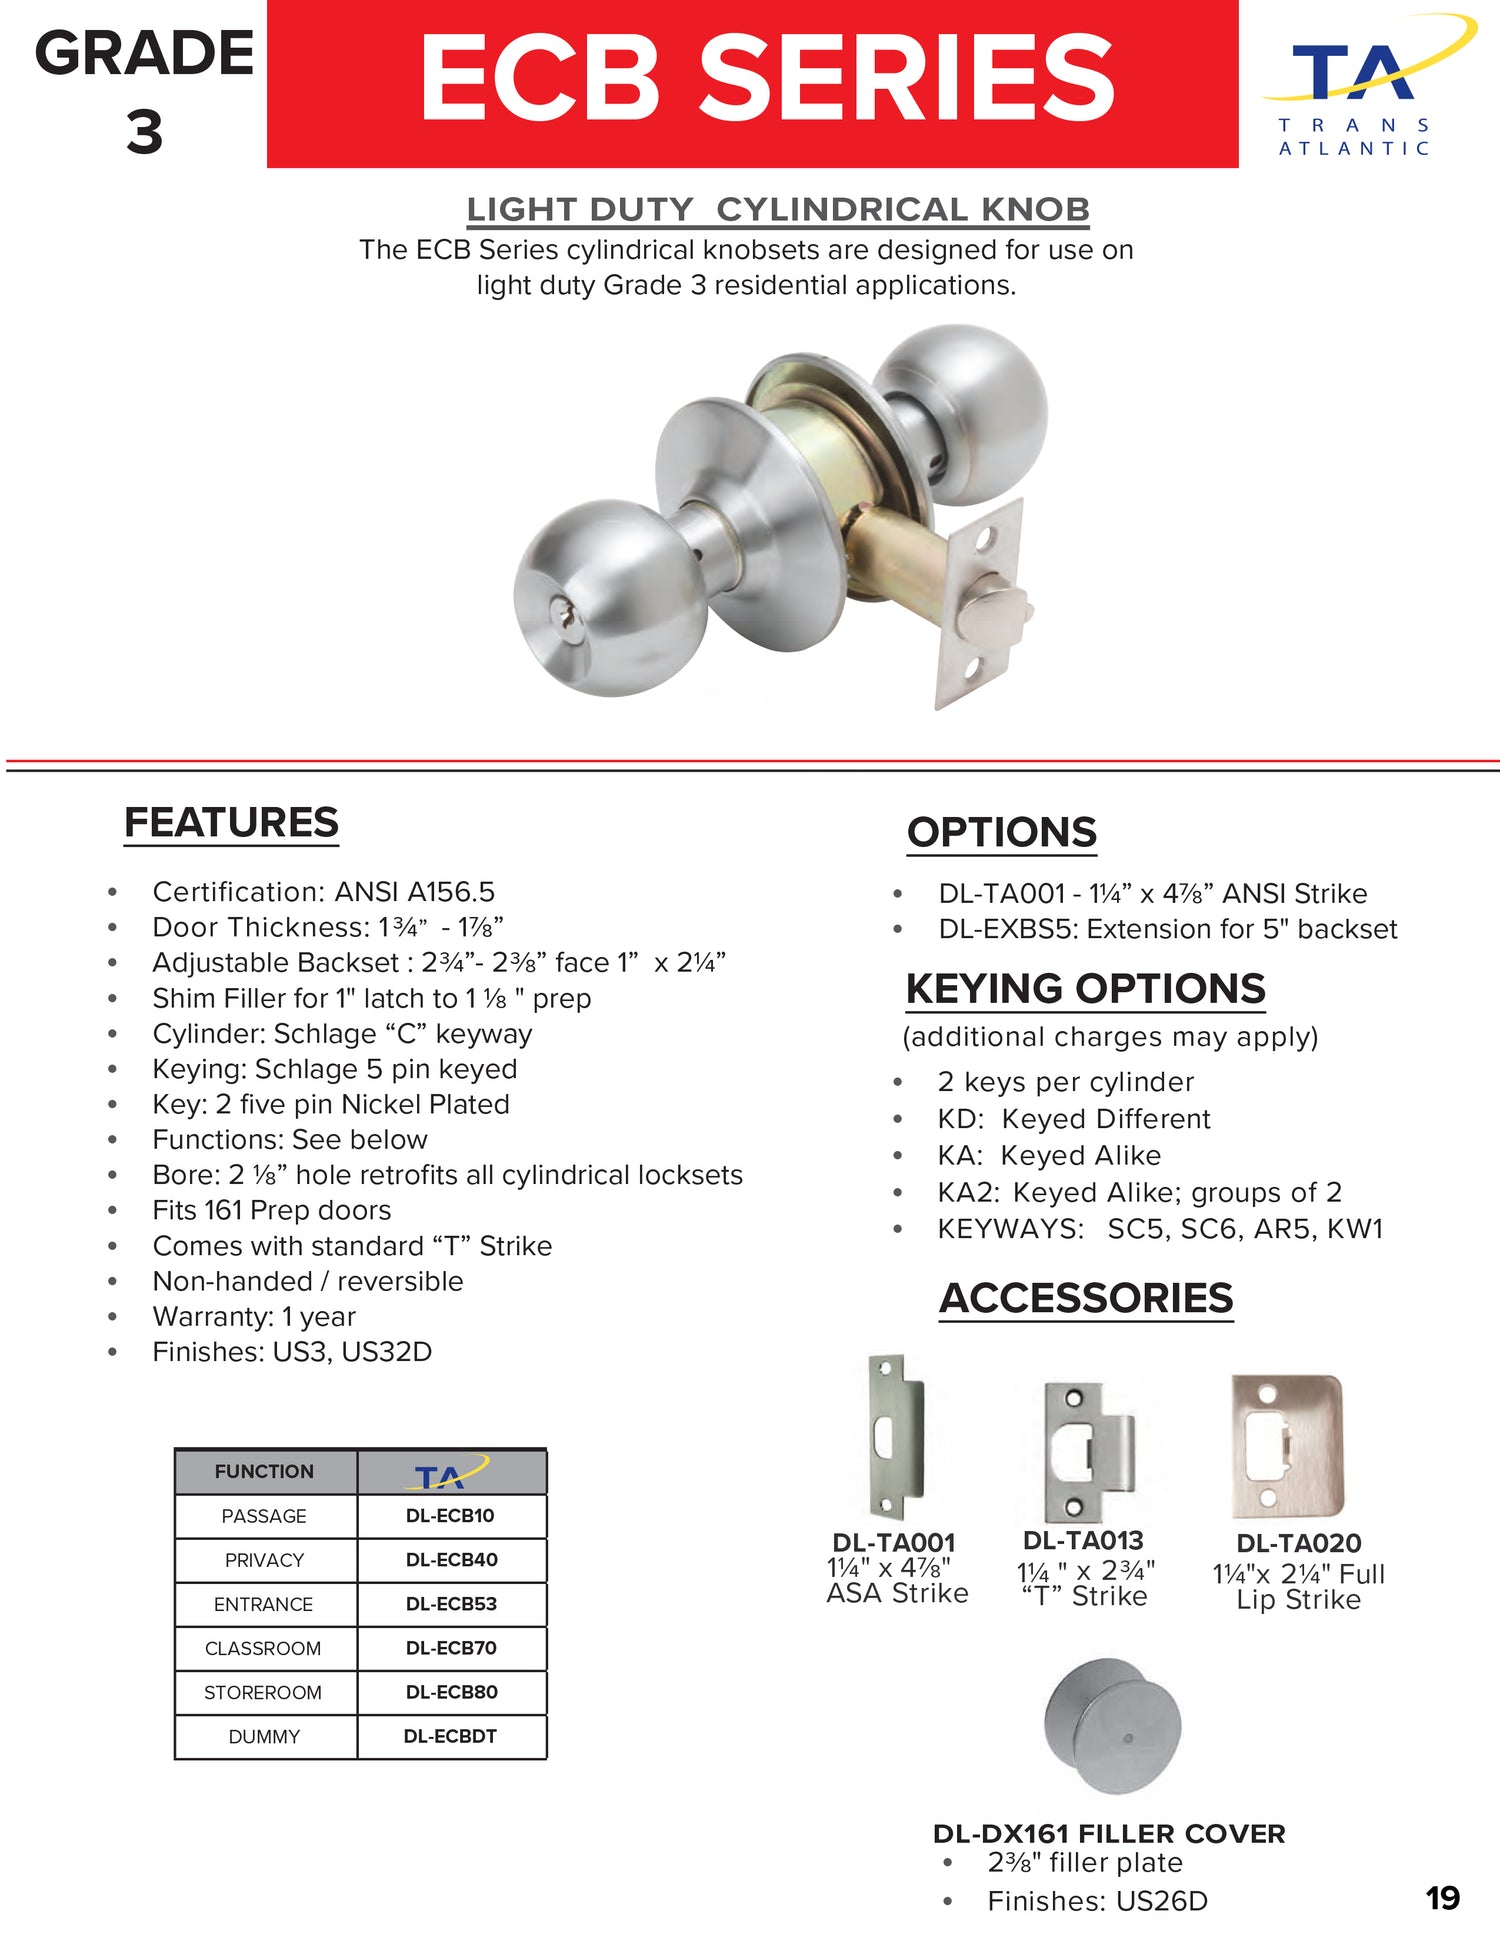 Grade 3 Light Duty Residential Cylindrical Keyed Entry Door Knob with Lock